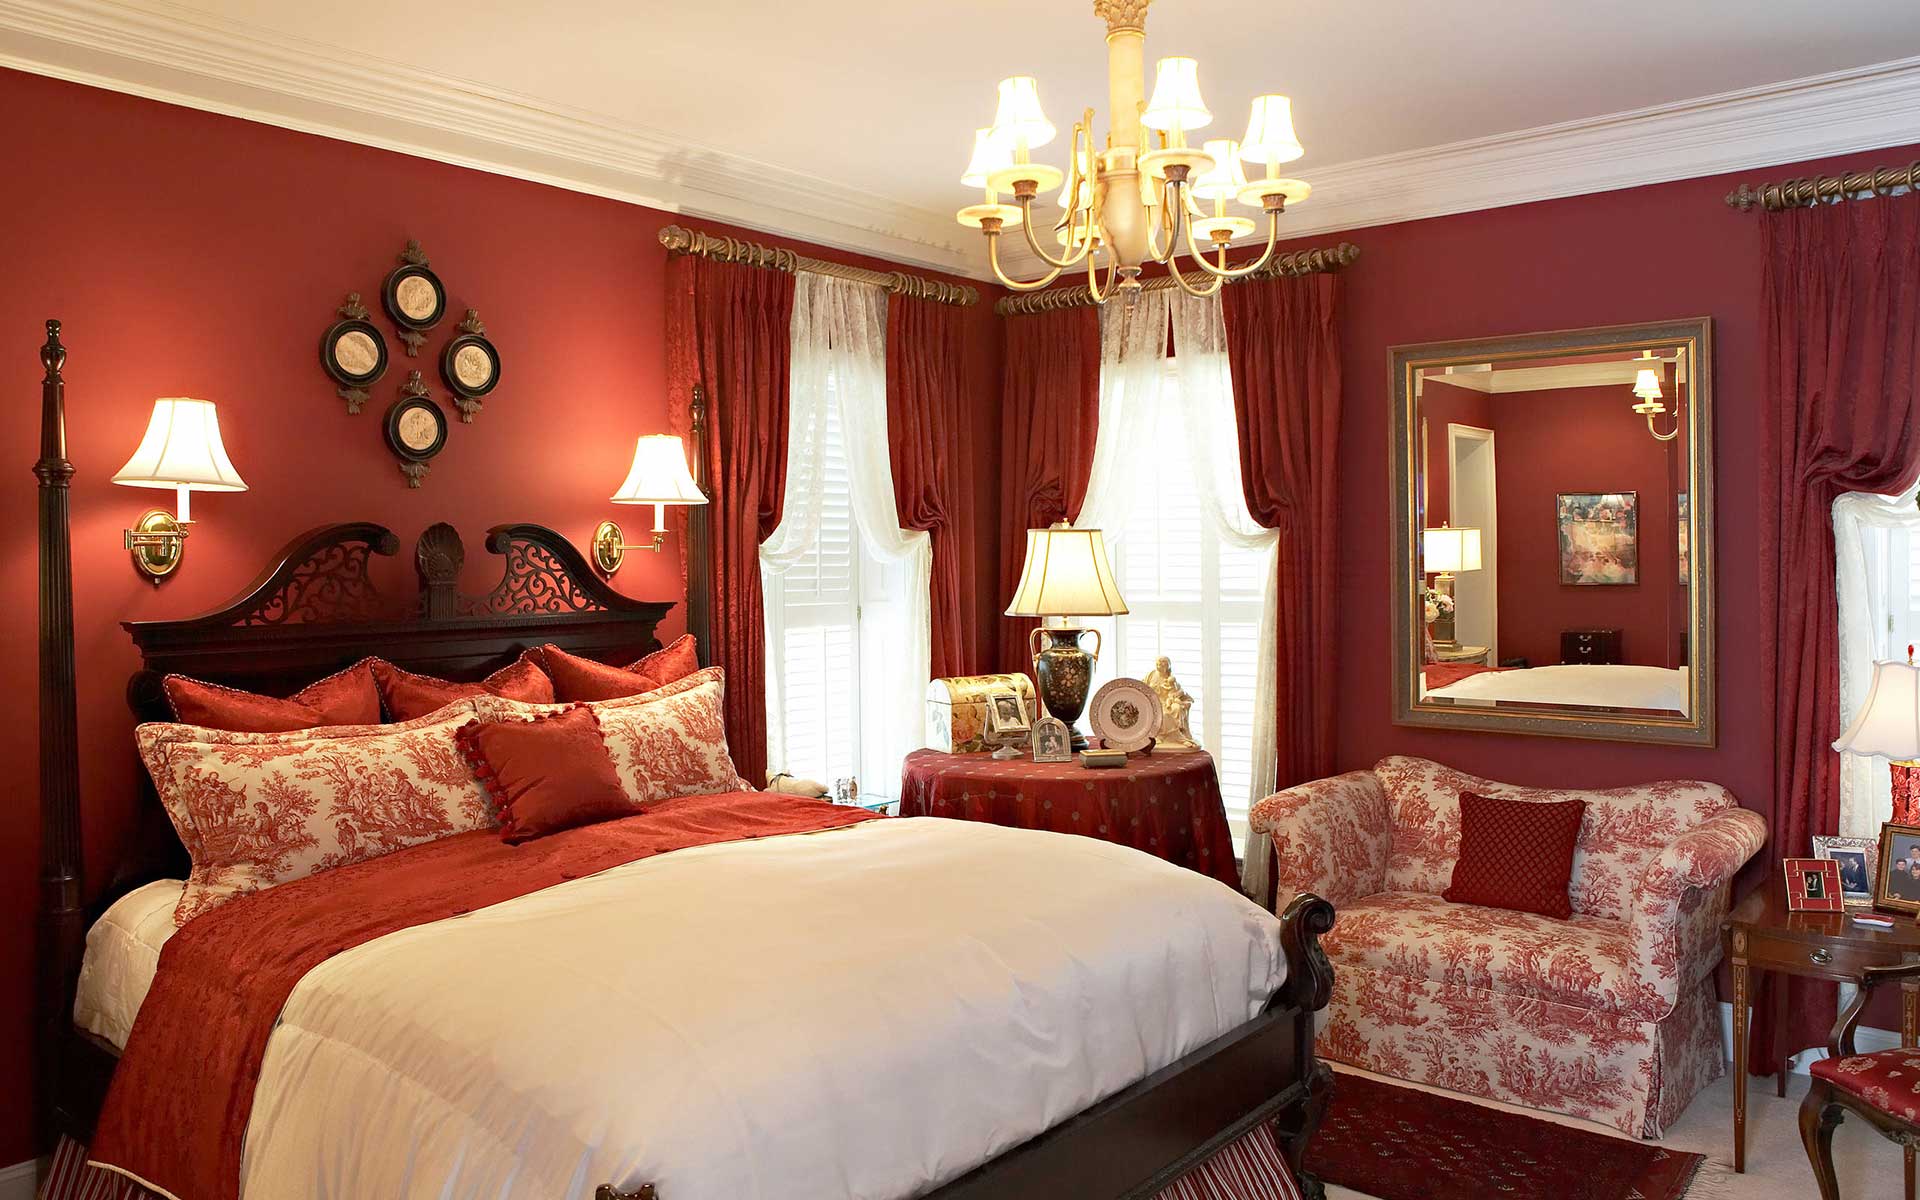 Aristocratic-style bedroom in rich red tones. Printed fabric cushions and sofa add Victorian vibes to the overall design.